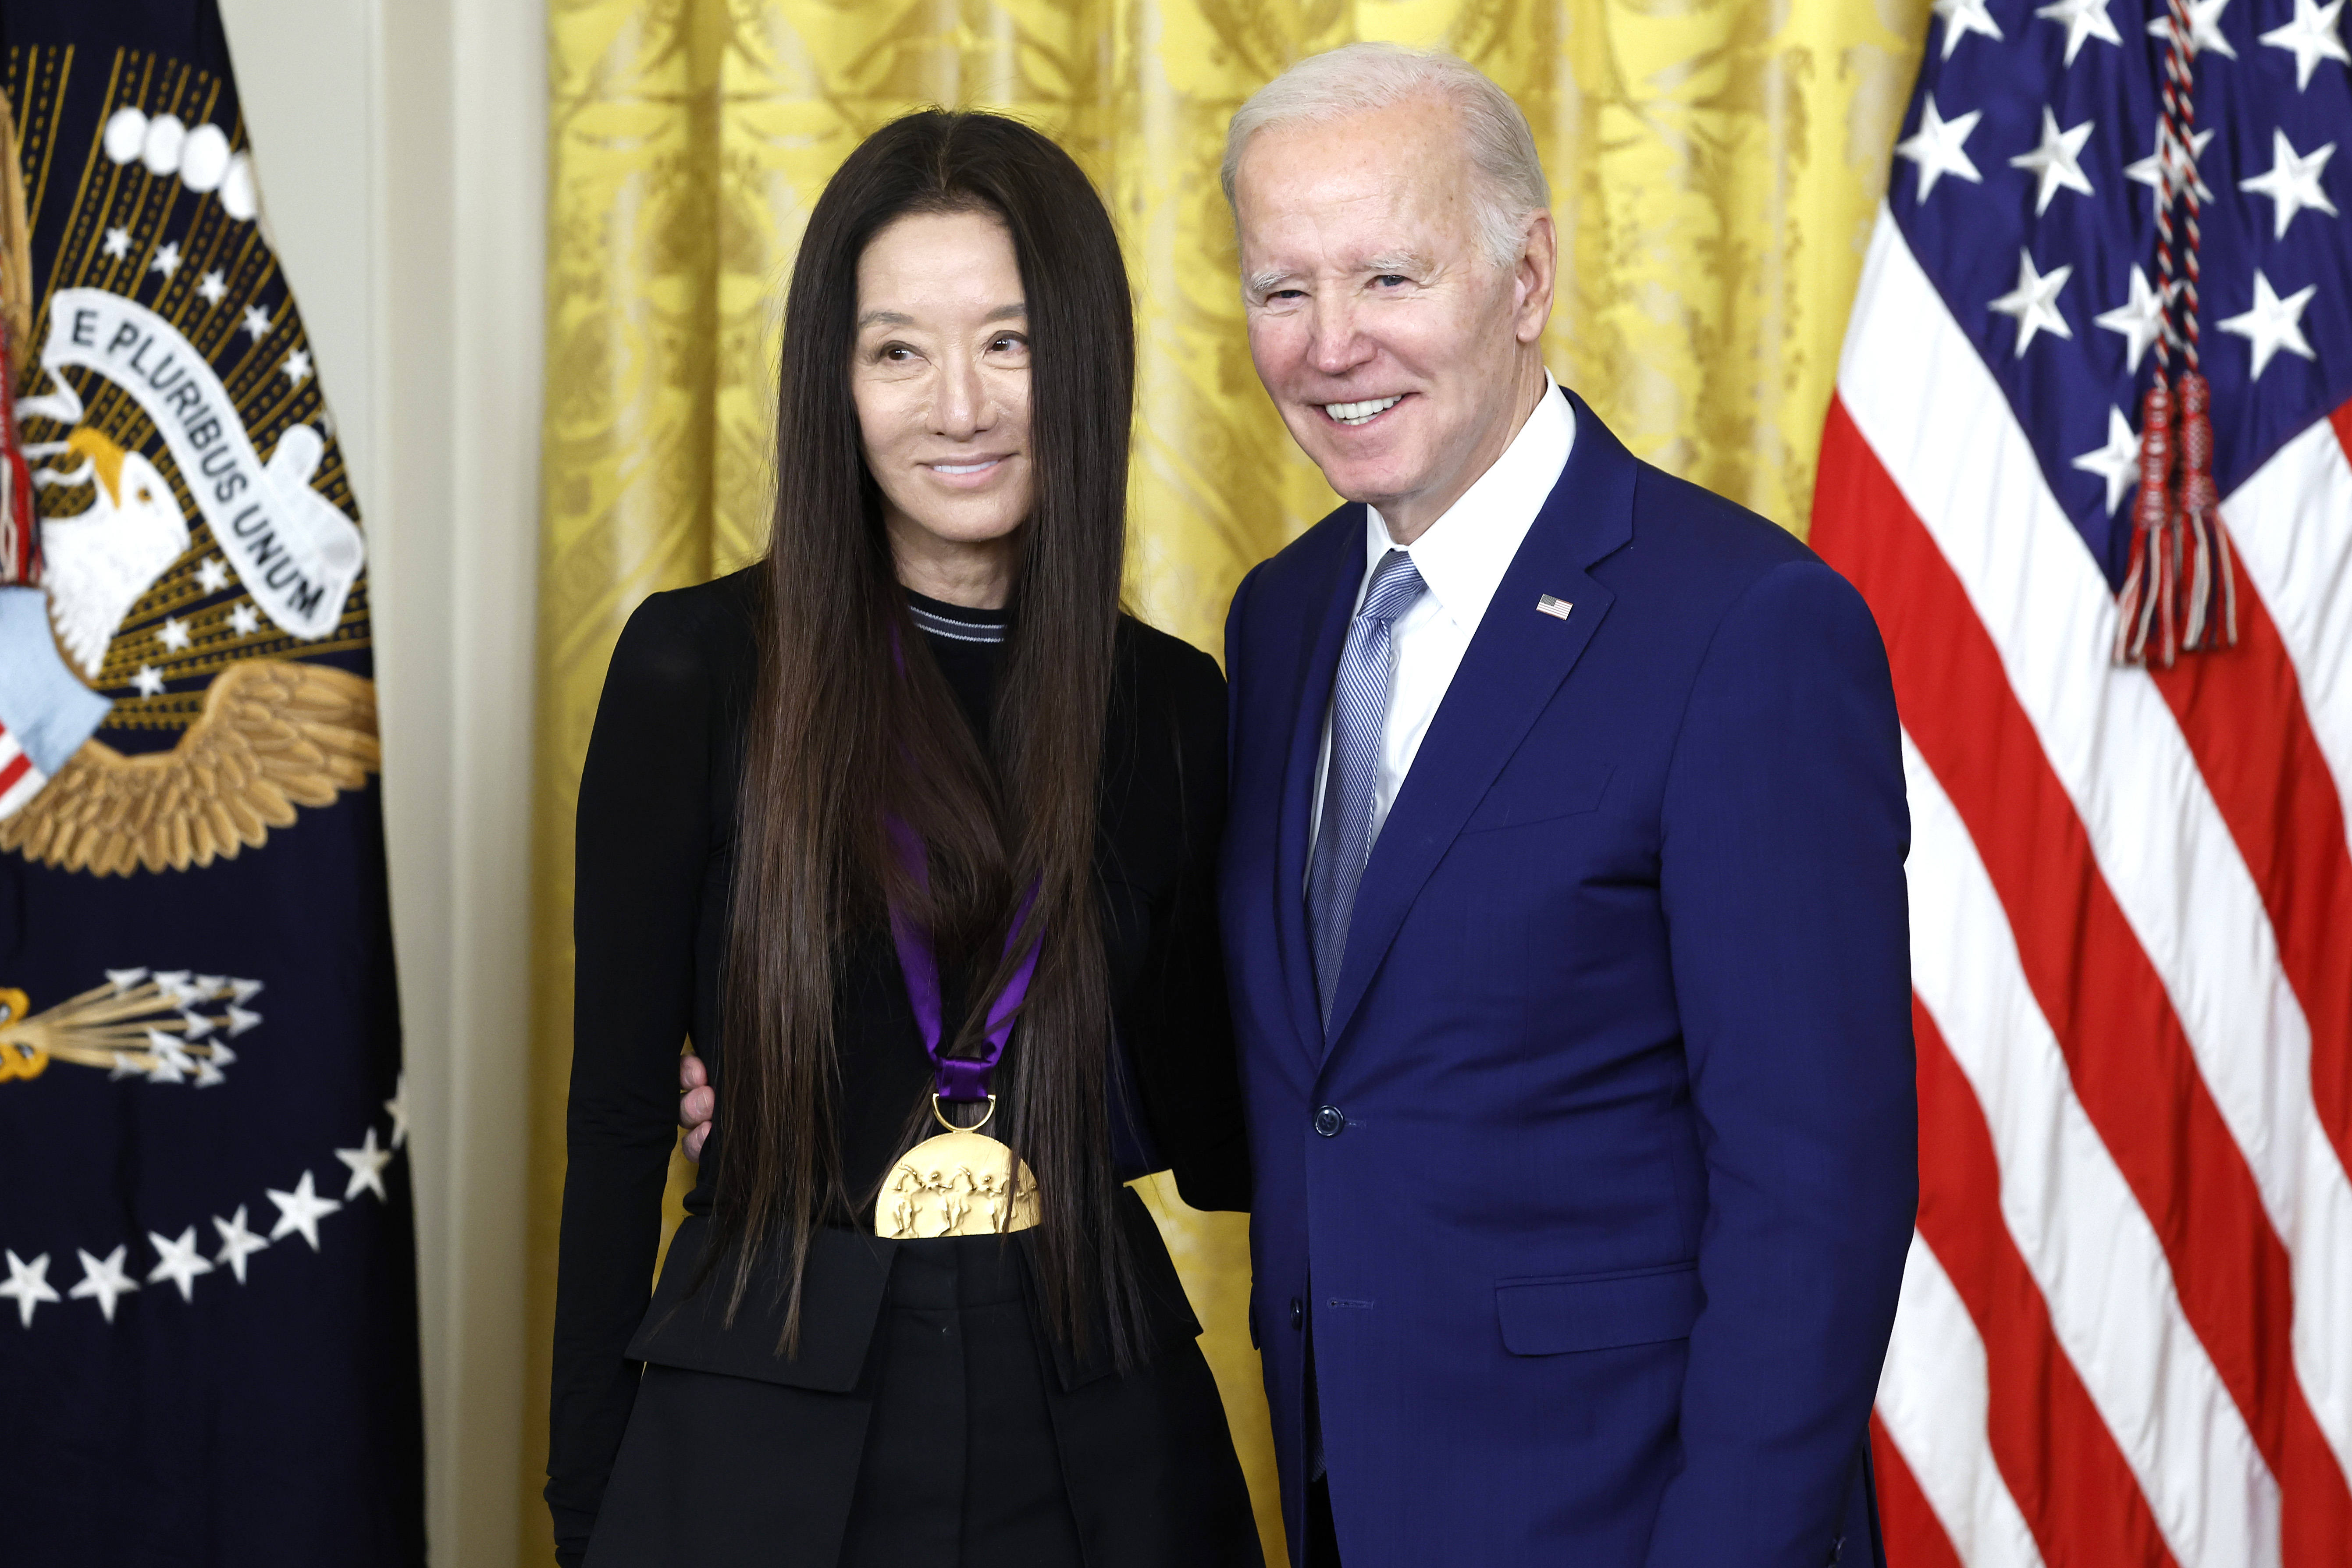 Out of body experience': Vera Wang honored with National Medal of